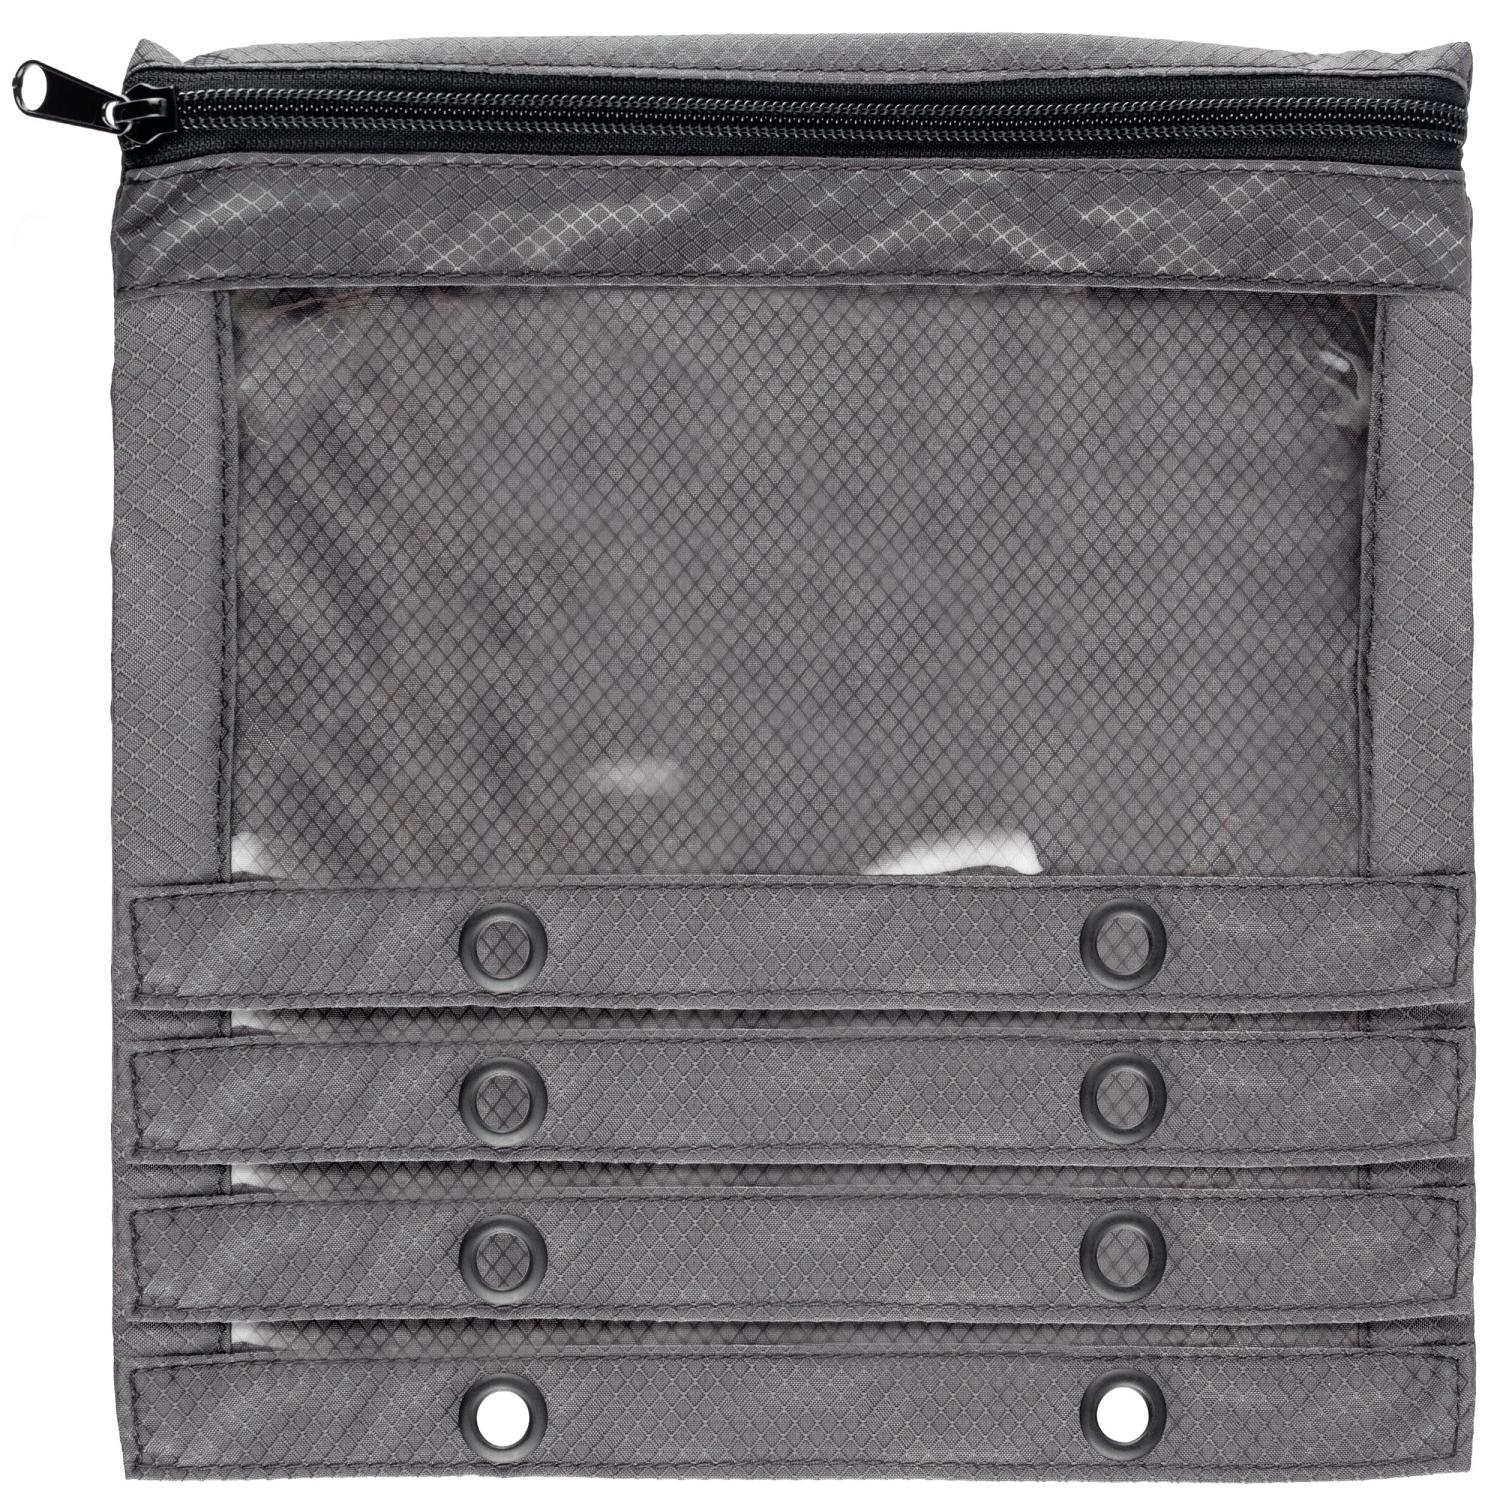 Reaction Tackle Deluxe Bait Binder - Salt Water Resistant Fishing Tackle  Binder with 4 Single Pocket Sleeves and 2 Double Pocket Sleeves, Heavy Duty  Soft Plastic Bait Storage Lines, Hooks, Sinkers b.